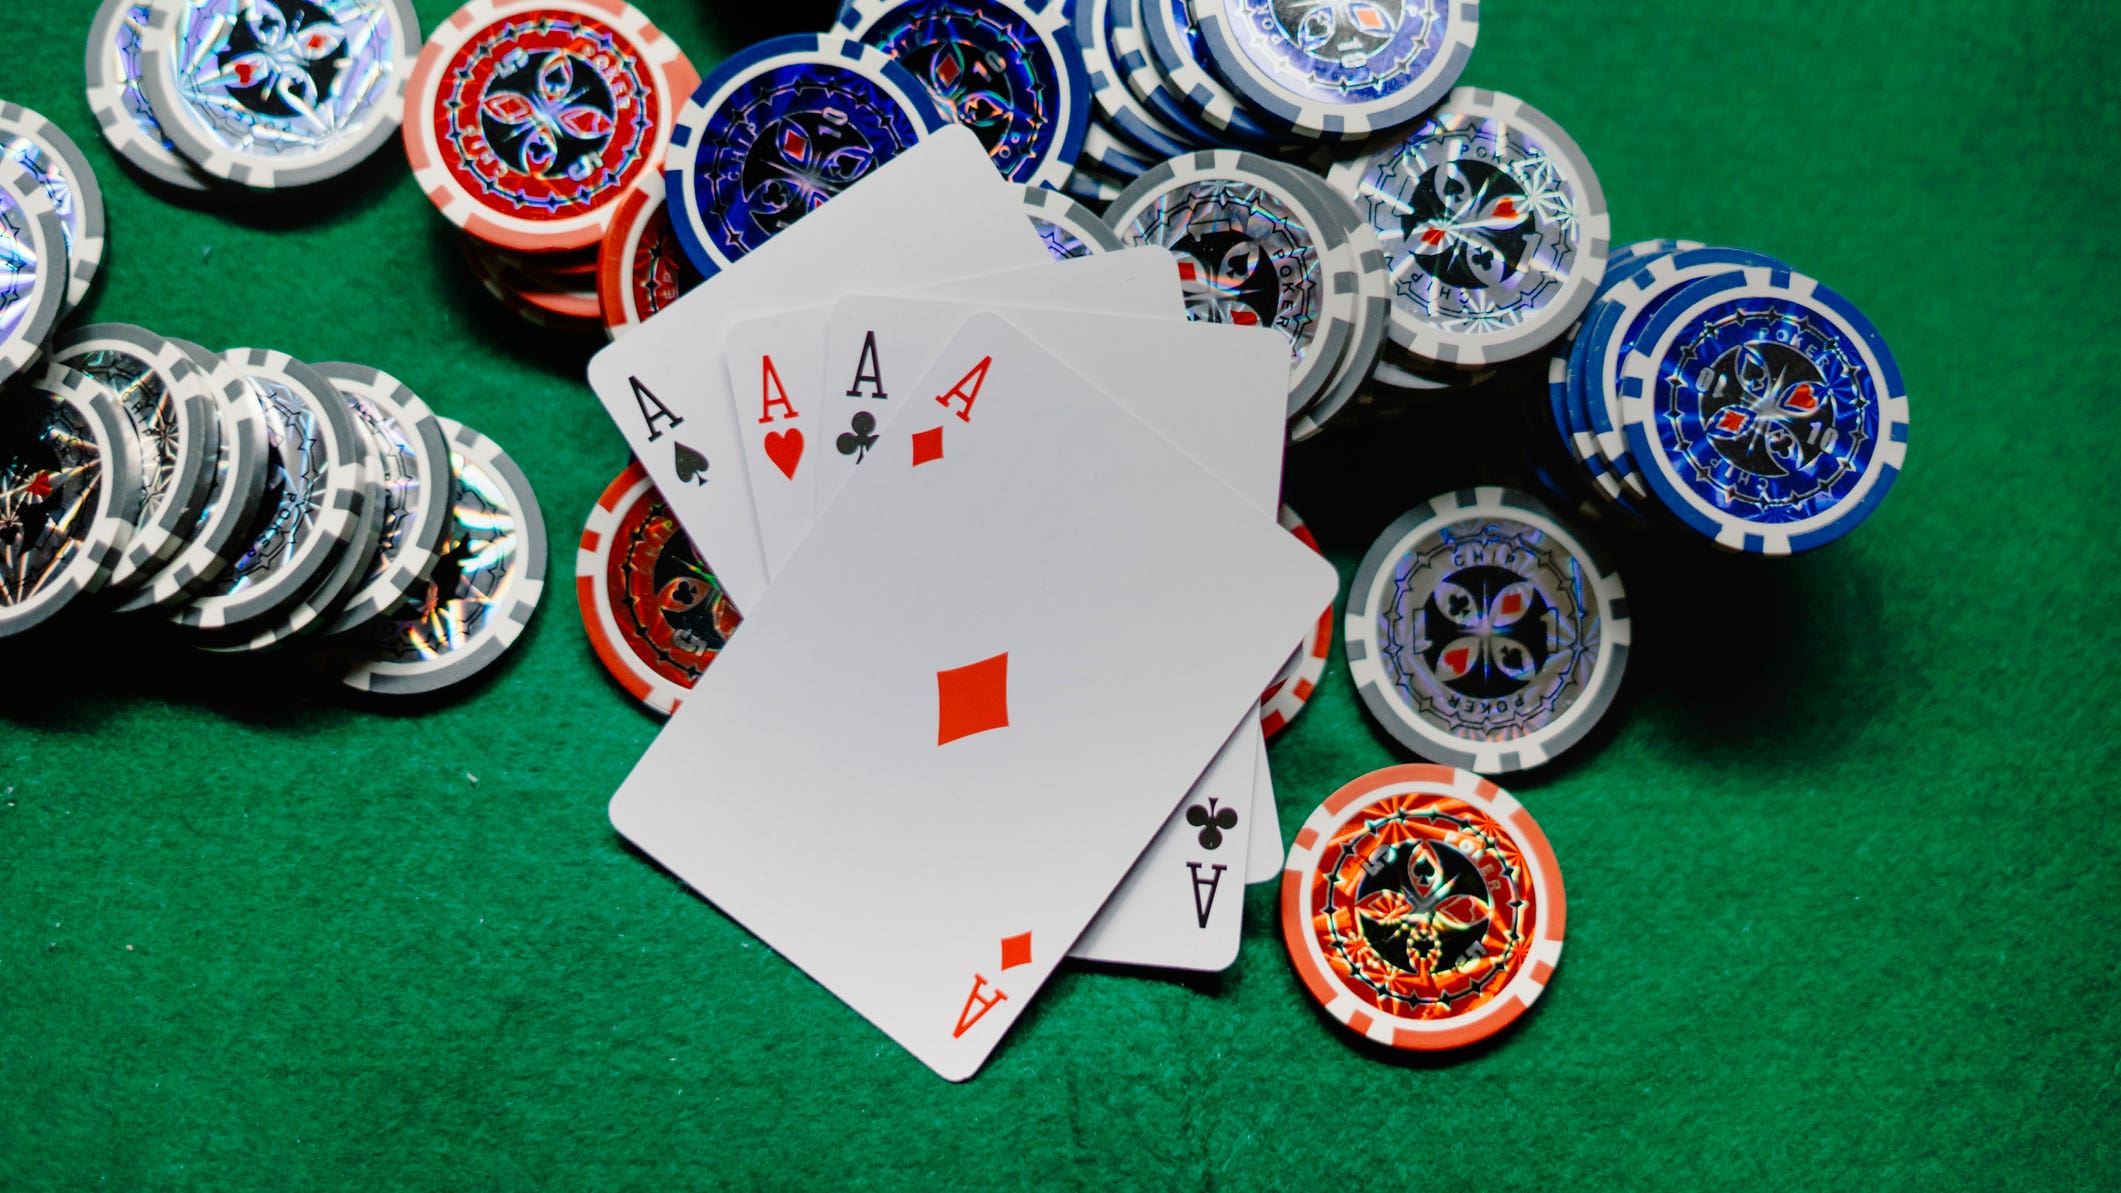 Playing poker cards and chips at the poker table